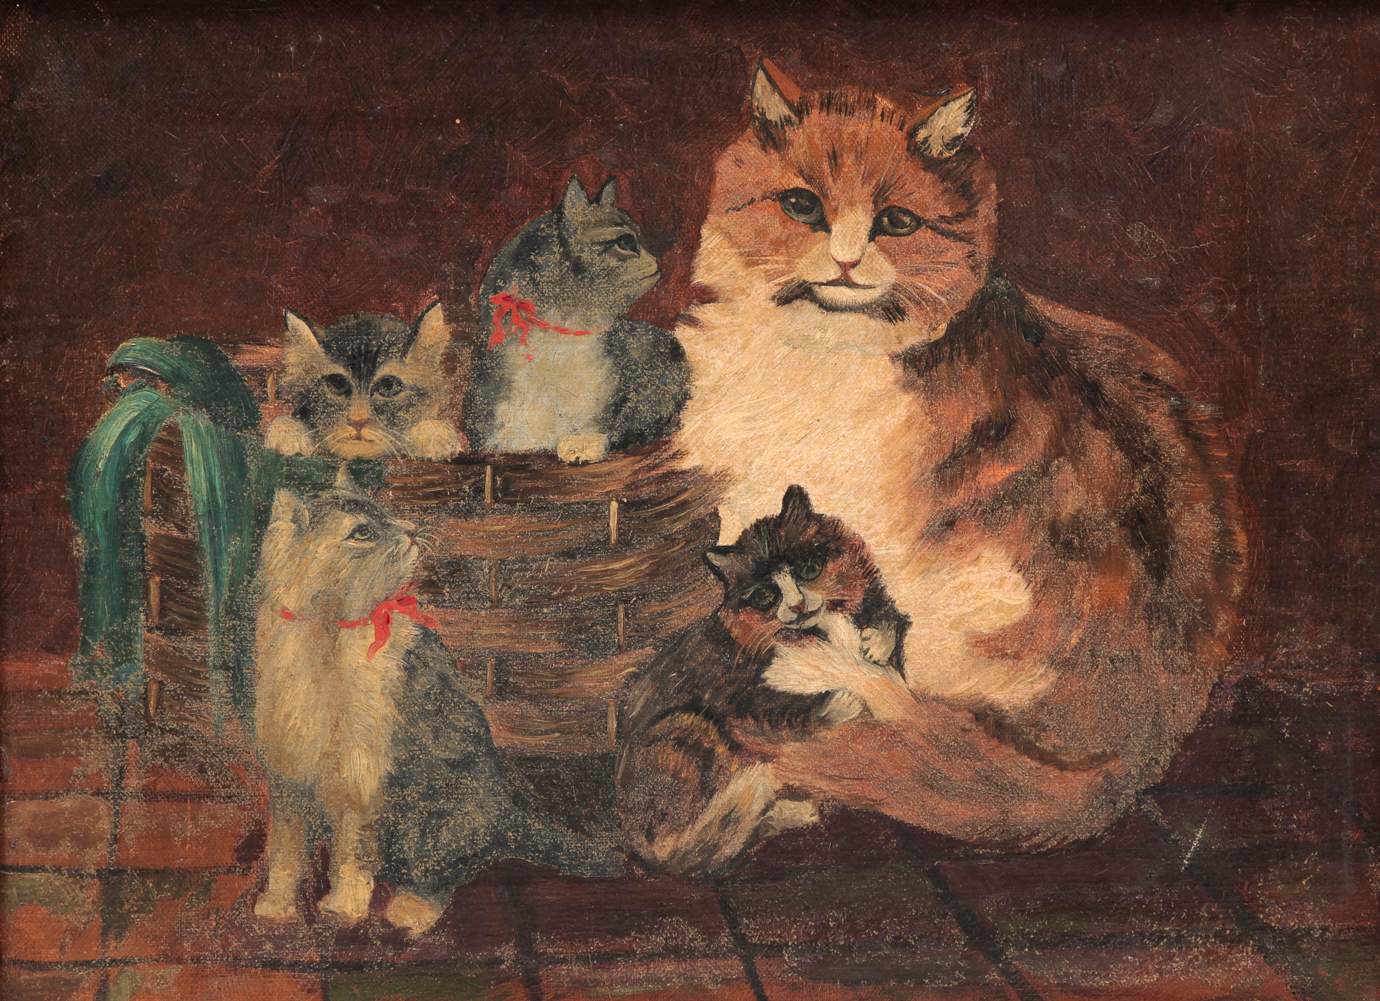 AMERICAN OIL ON CANVAS OF CATS  2dff3d